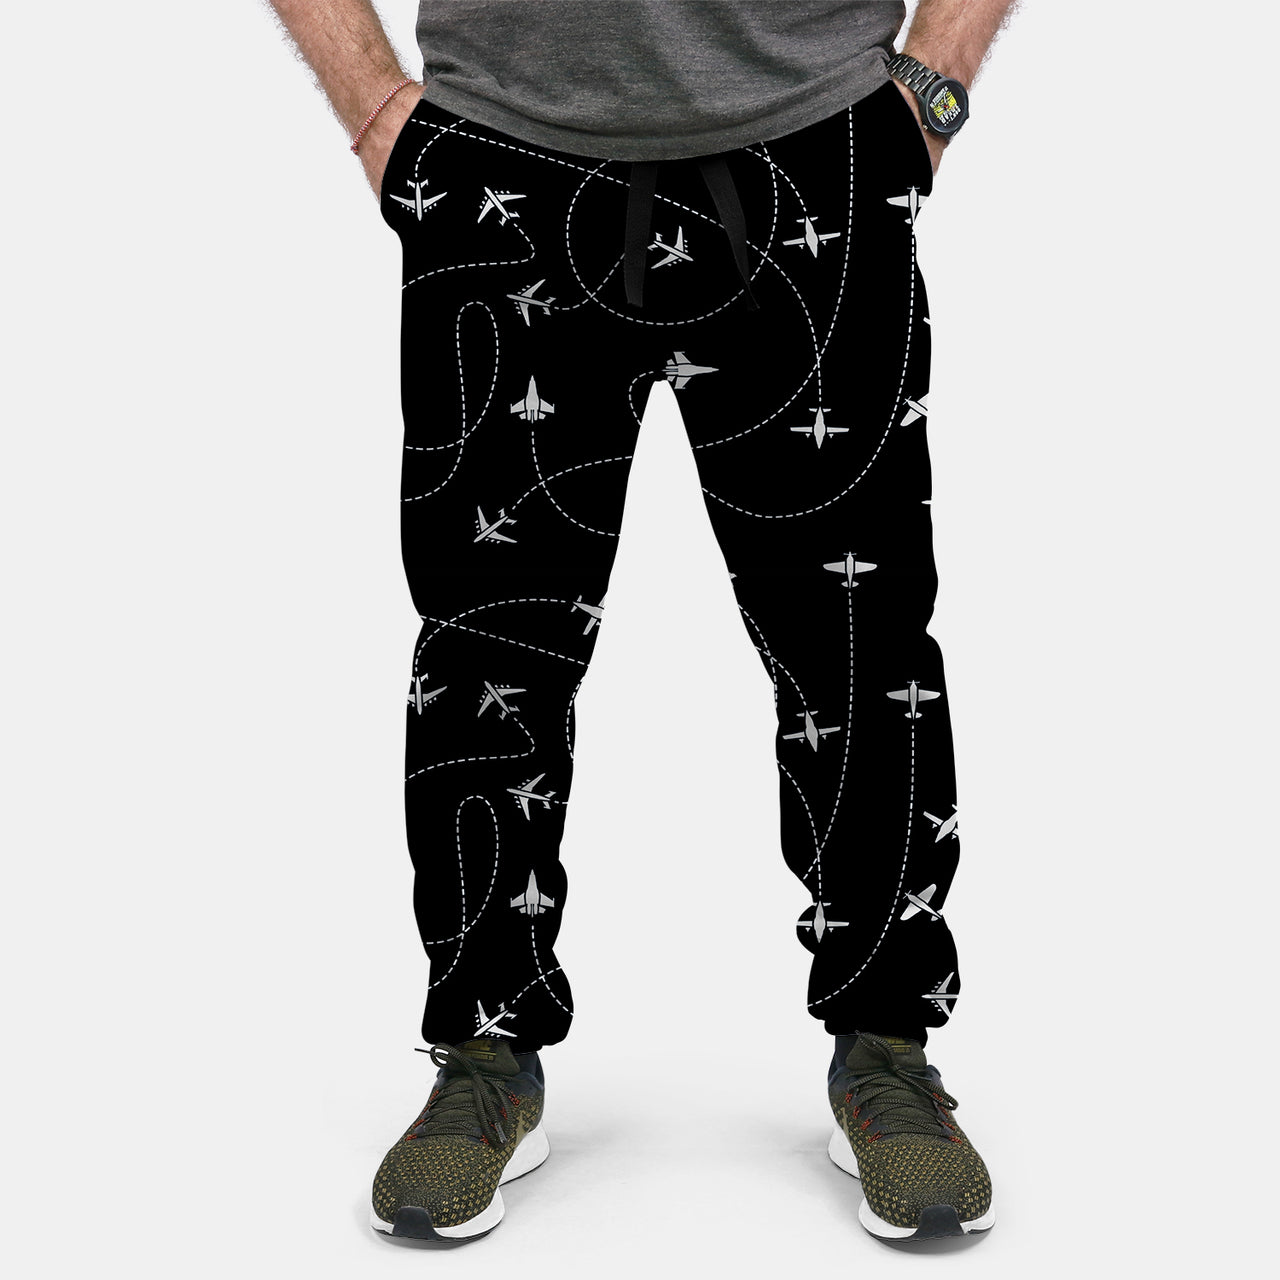 Travel The World By Plane (Black) Designed Sweat Pants & Trousers